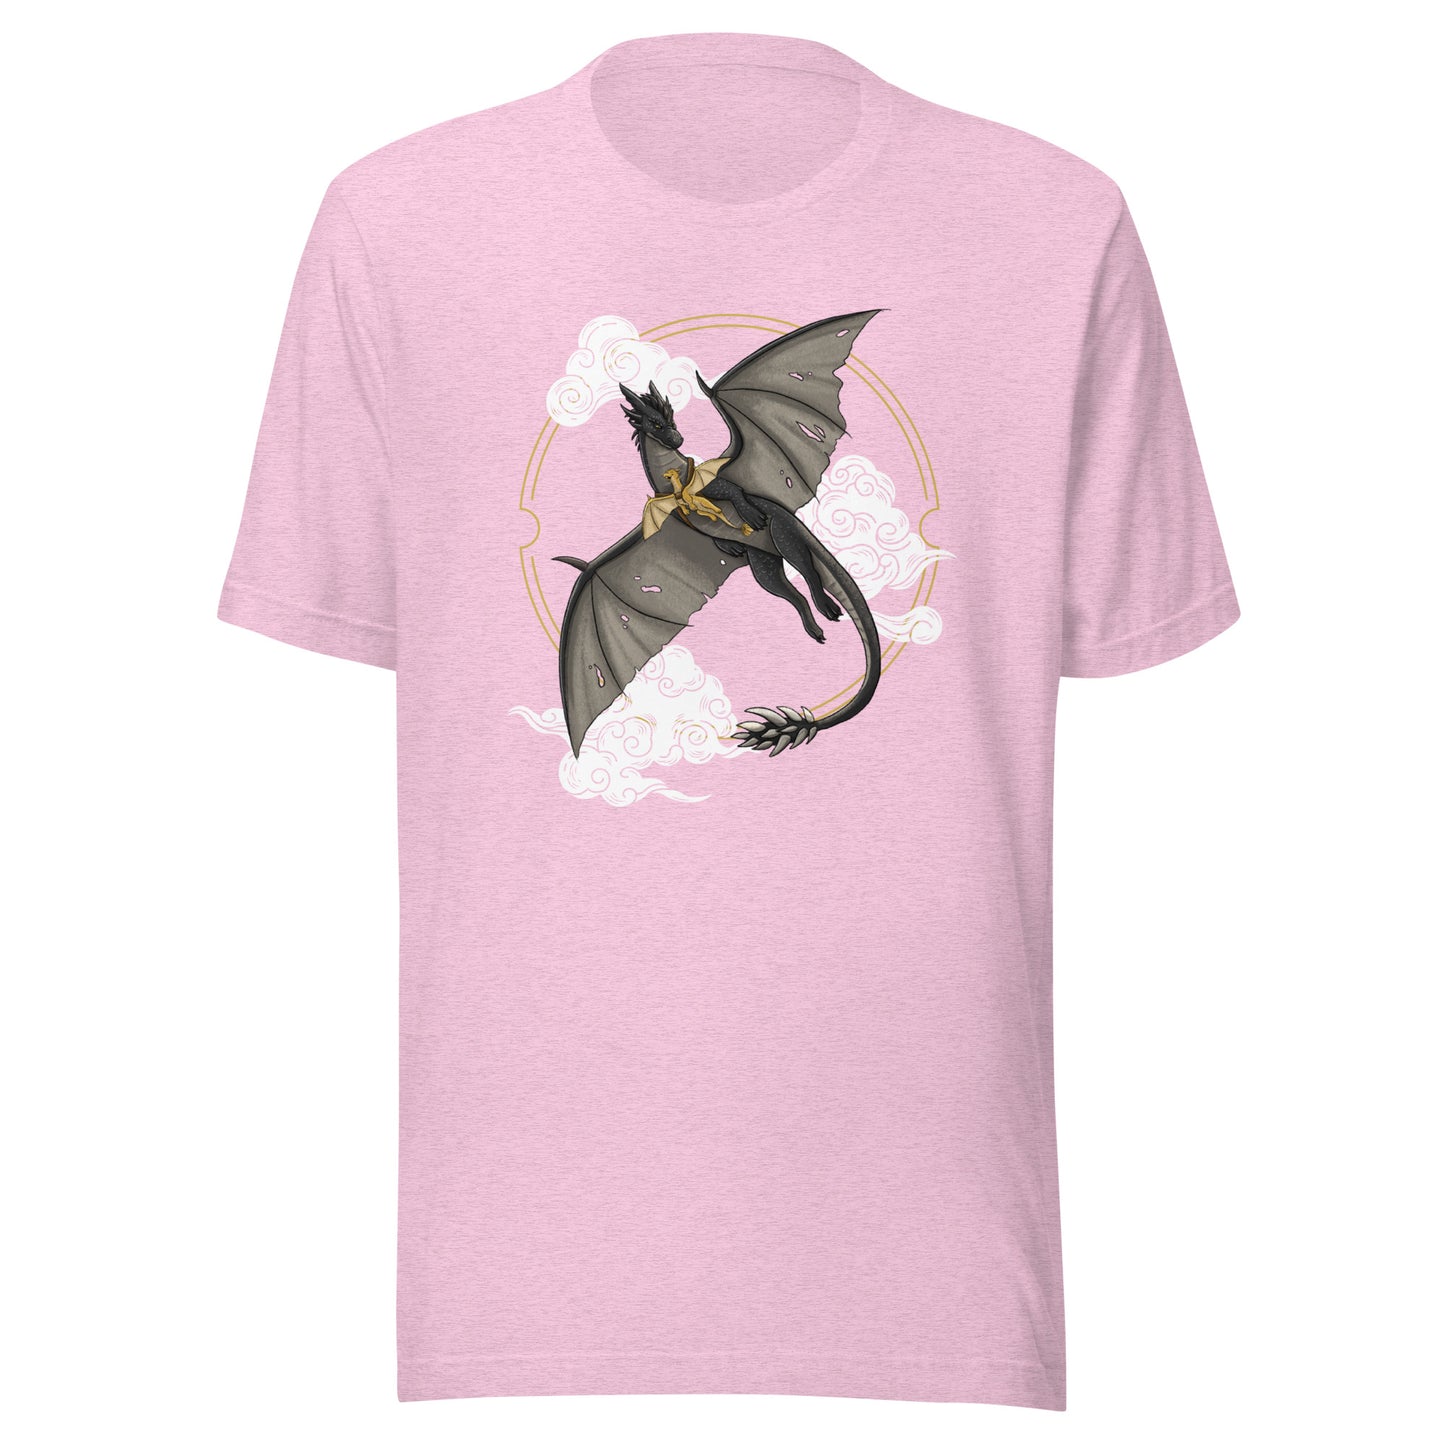 Tairn and Andarna Flying T-shirt